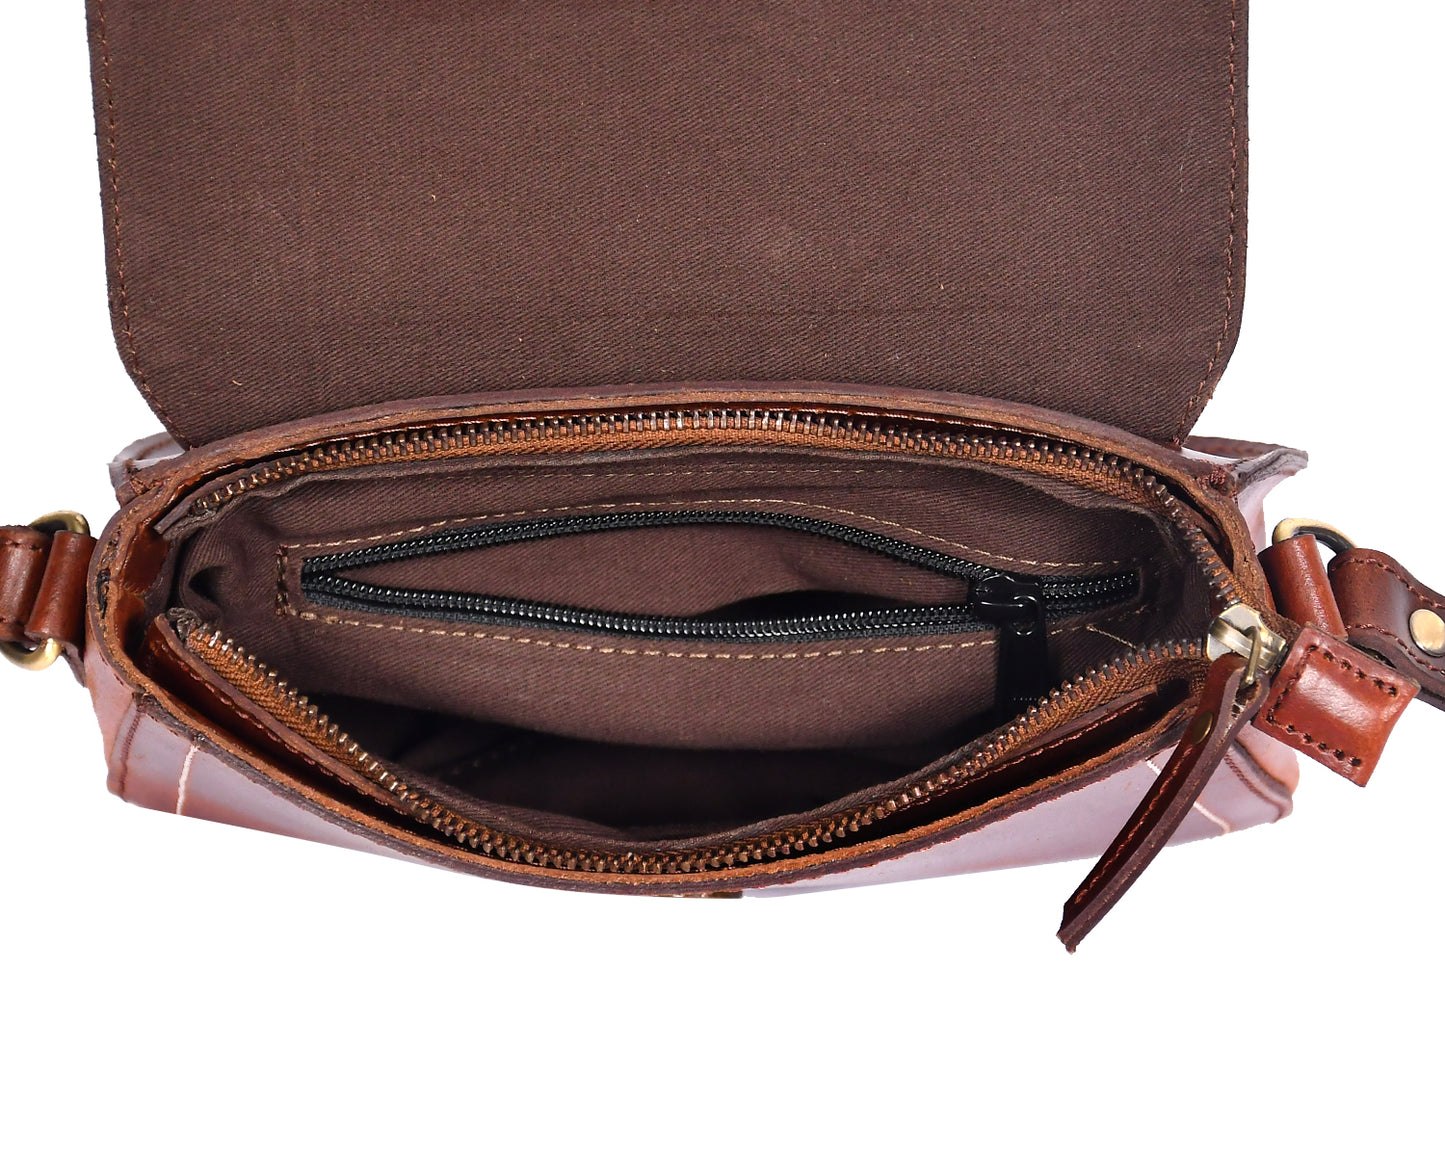 Elevate Your Style with our Brown Leather Sling Bag – The Perfect Fashion Accessory. - CELTICINDIA